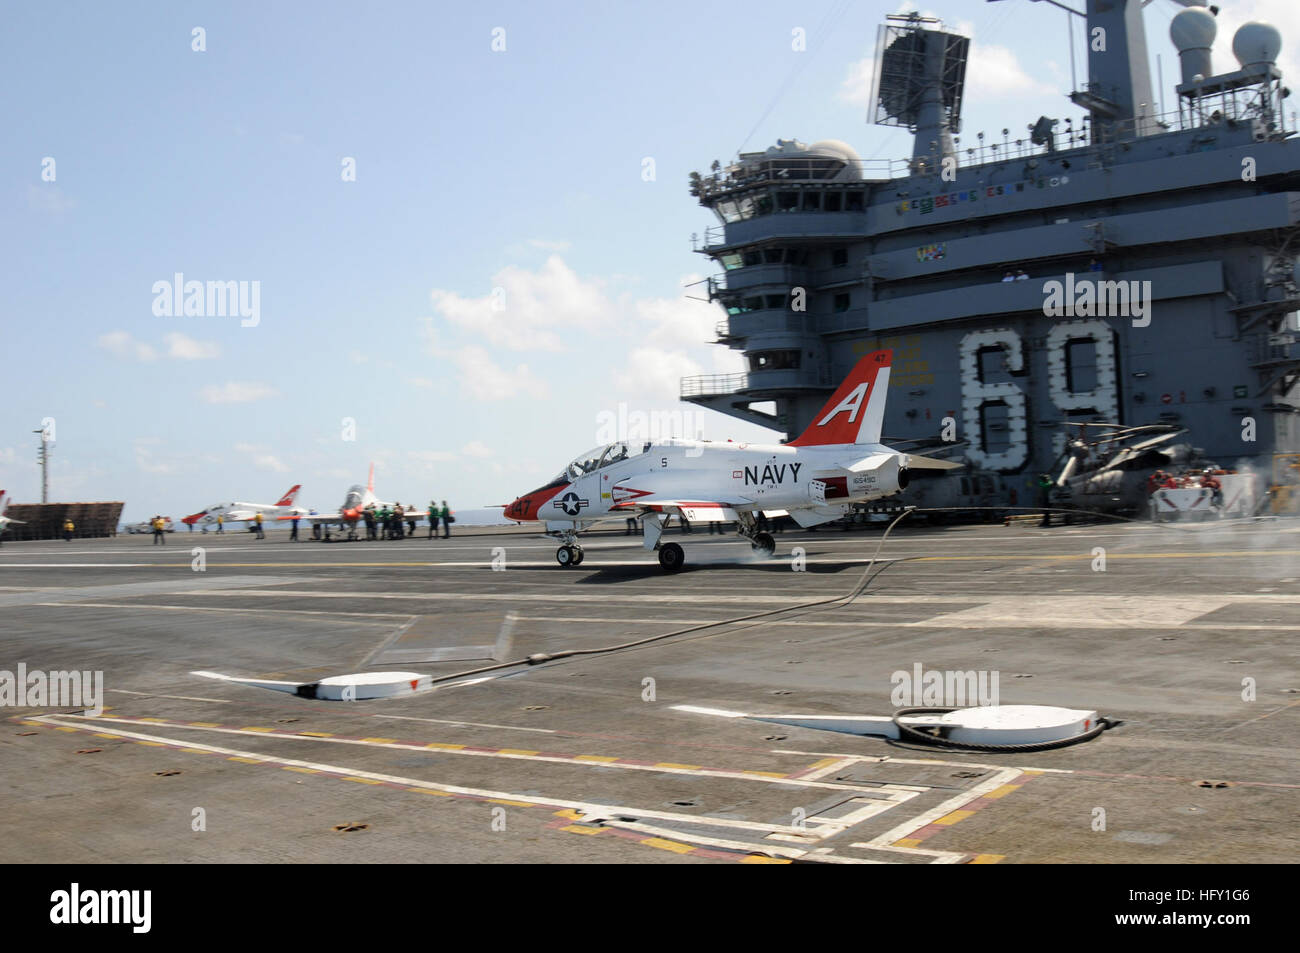 110728-N-SR846-046 ATLANTIC OCEAN (July 28, 2011) A T-45C Goshawk training aircraft assigned to Chief of Naval Air Training (CNATRA) lands aboard the aircraft carrier USS Dwight D. Eisenhower (CVN 69). Dwight D. Eisenhower is underway assisting CNATRA in preparing naval aviators for future carrier-based operations. (U.S. Navy photo by Mass Communication Specialist Seaman Rob Rupp/Released) US Navy 110728-N-SR846-046 A T-45C Goshawk training aircraft lands aboard USS Dwight D. Eisenhower (CVN 69) Stock Photo